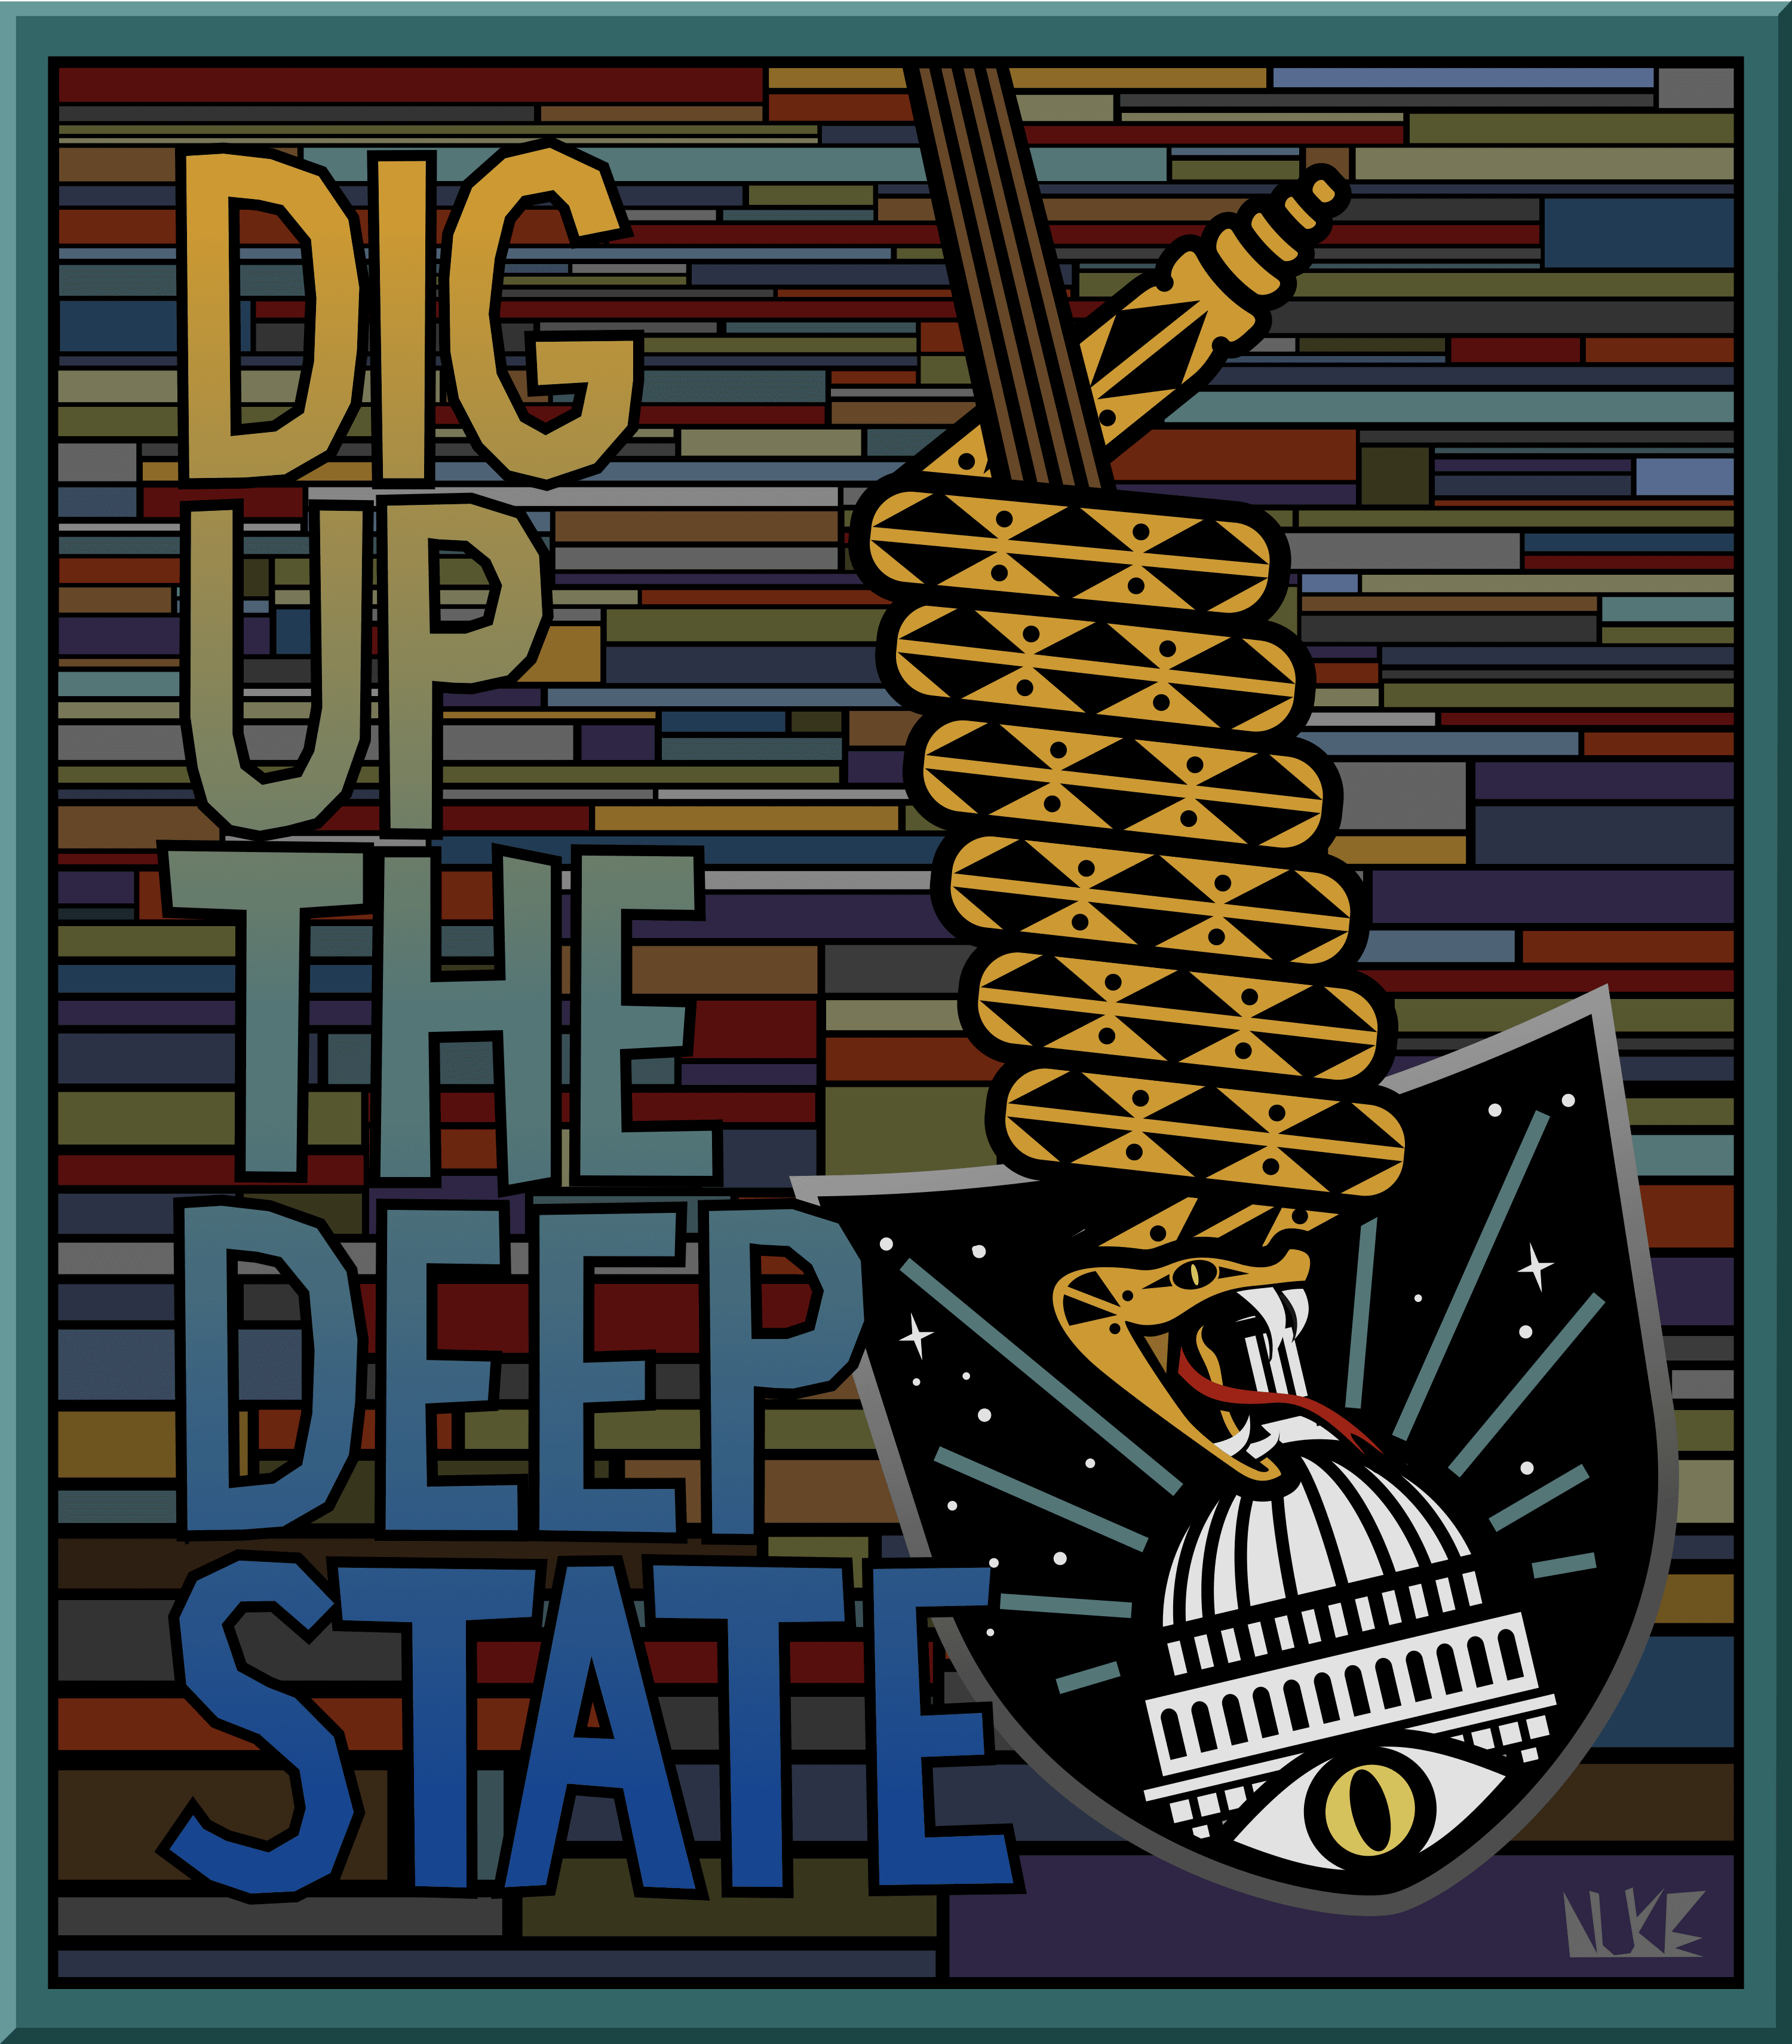 Dig Up the Deep State